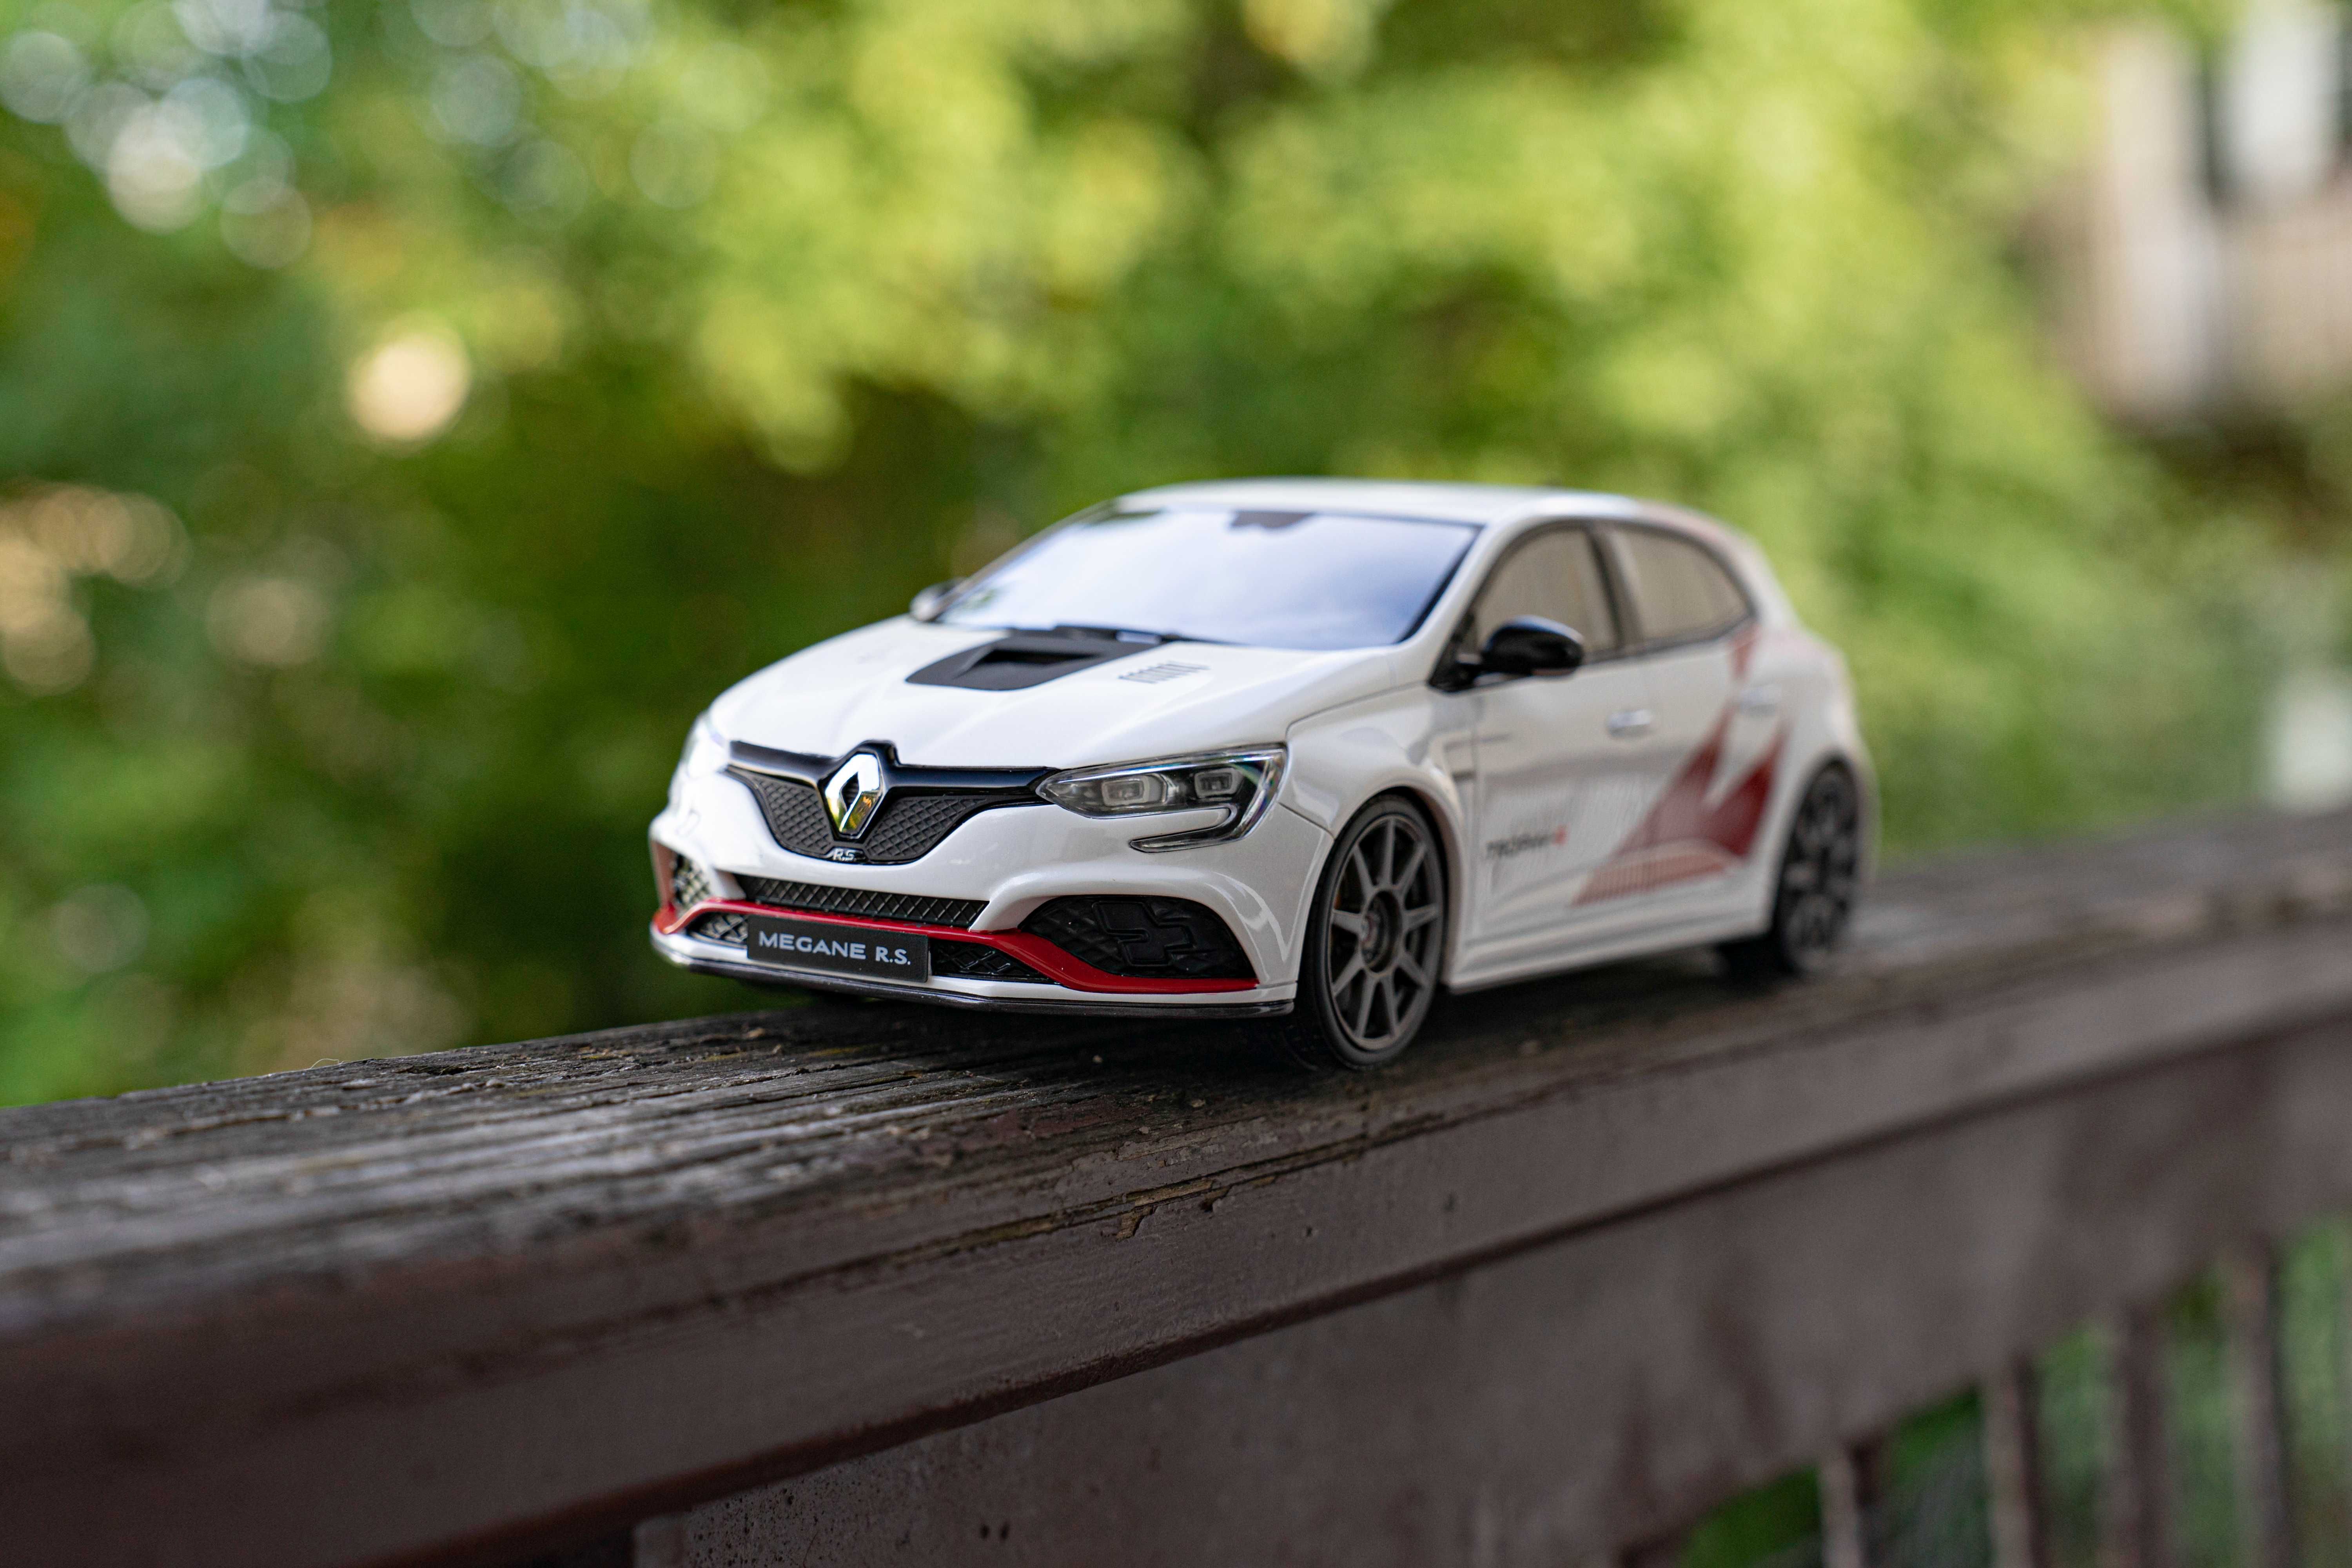 RENAULT MEGANE RS TROPHY-R Nurburgring Record Edition OTTO OT877